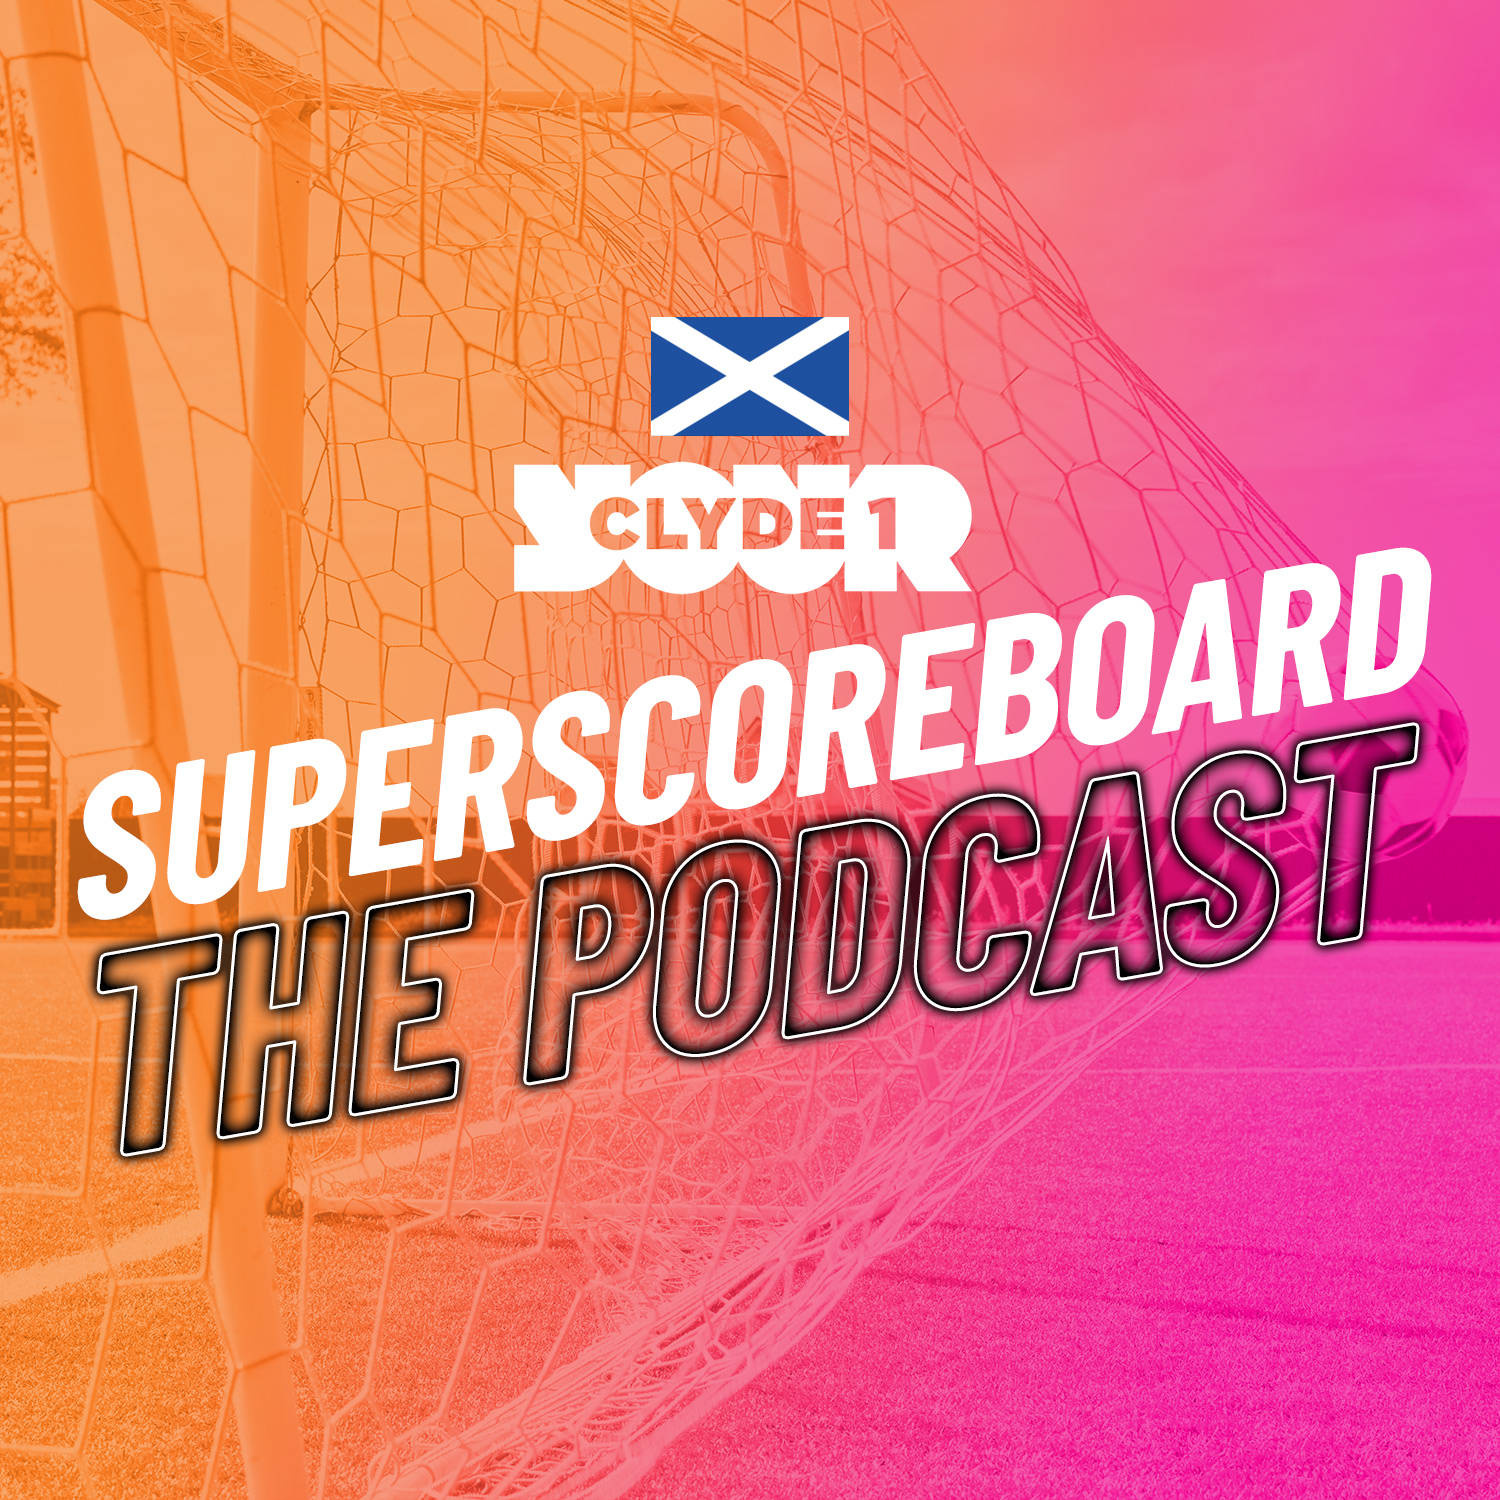 Tuesday 30th April Clyde 1 Superscoredboard